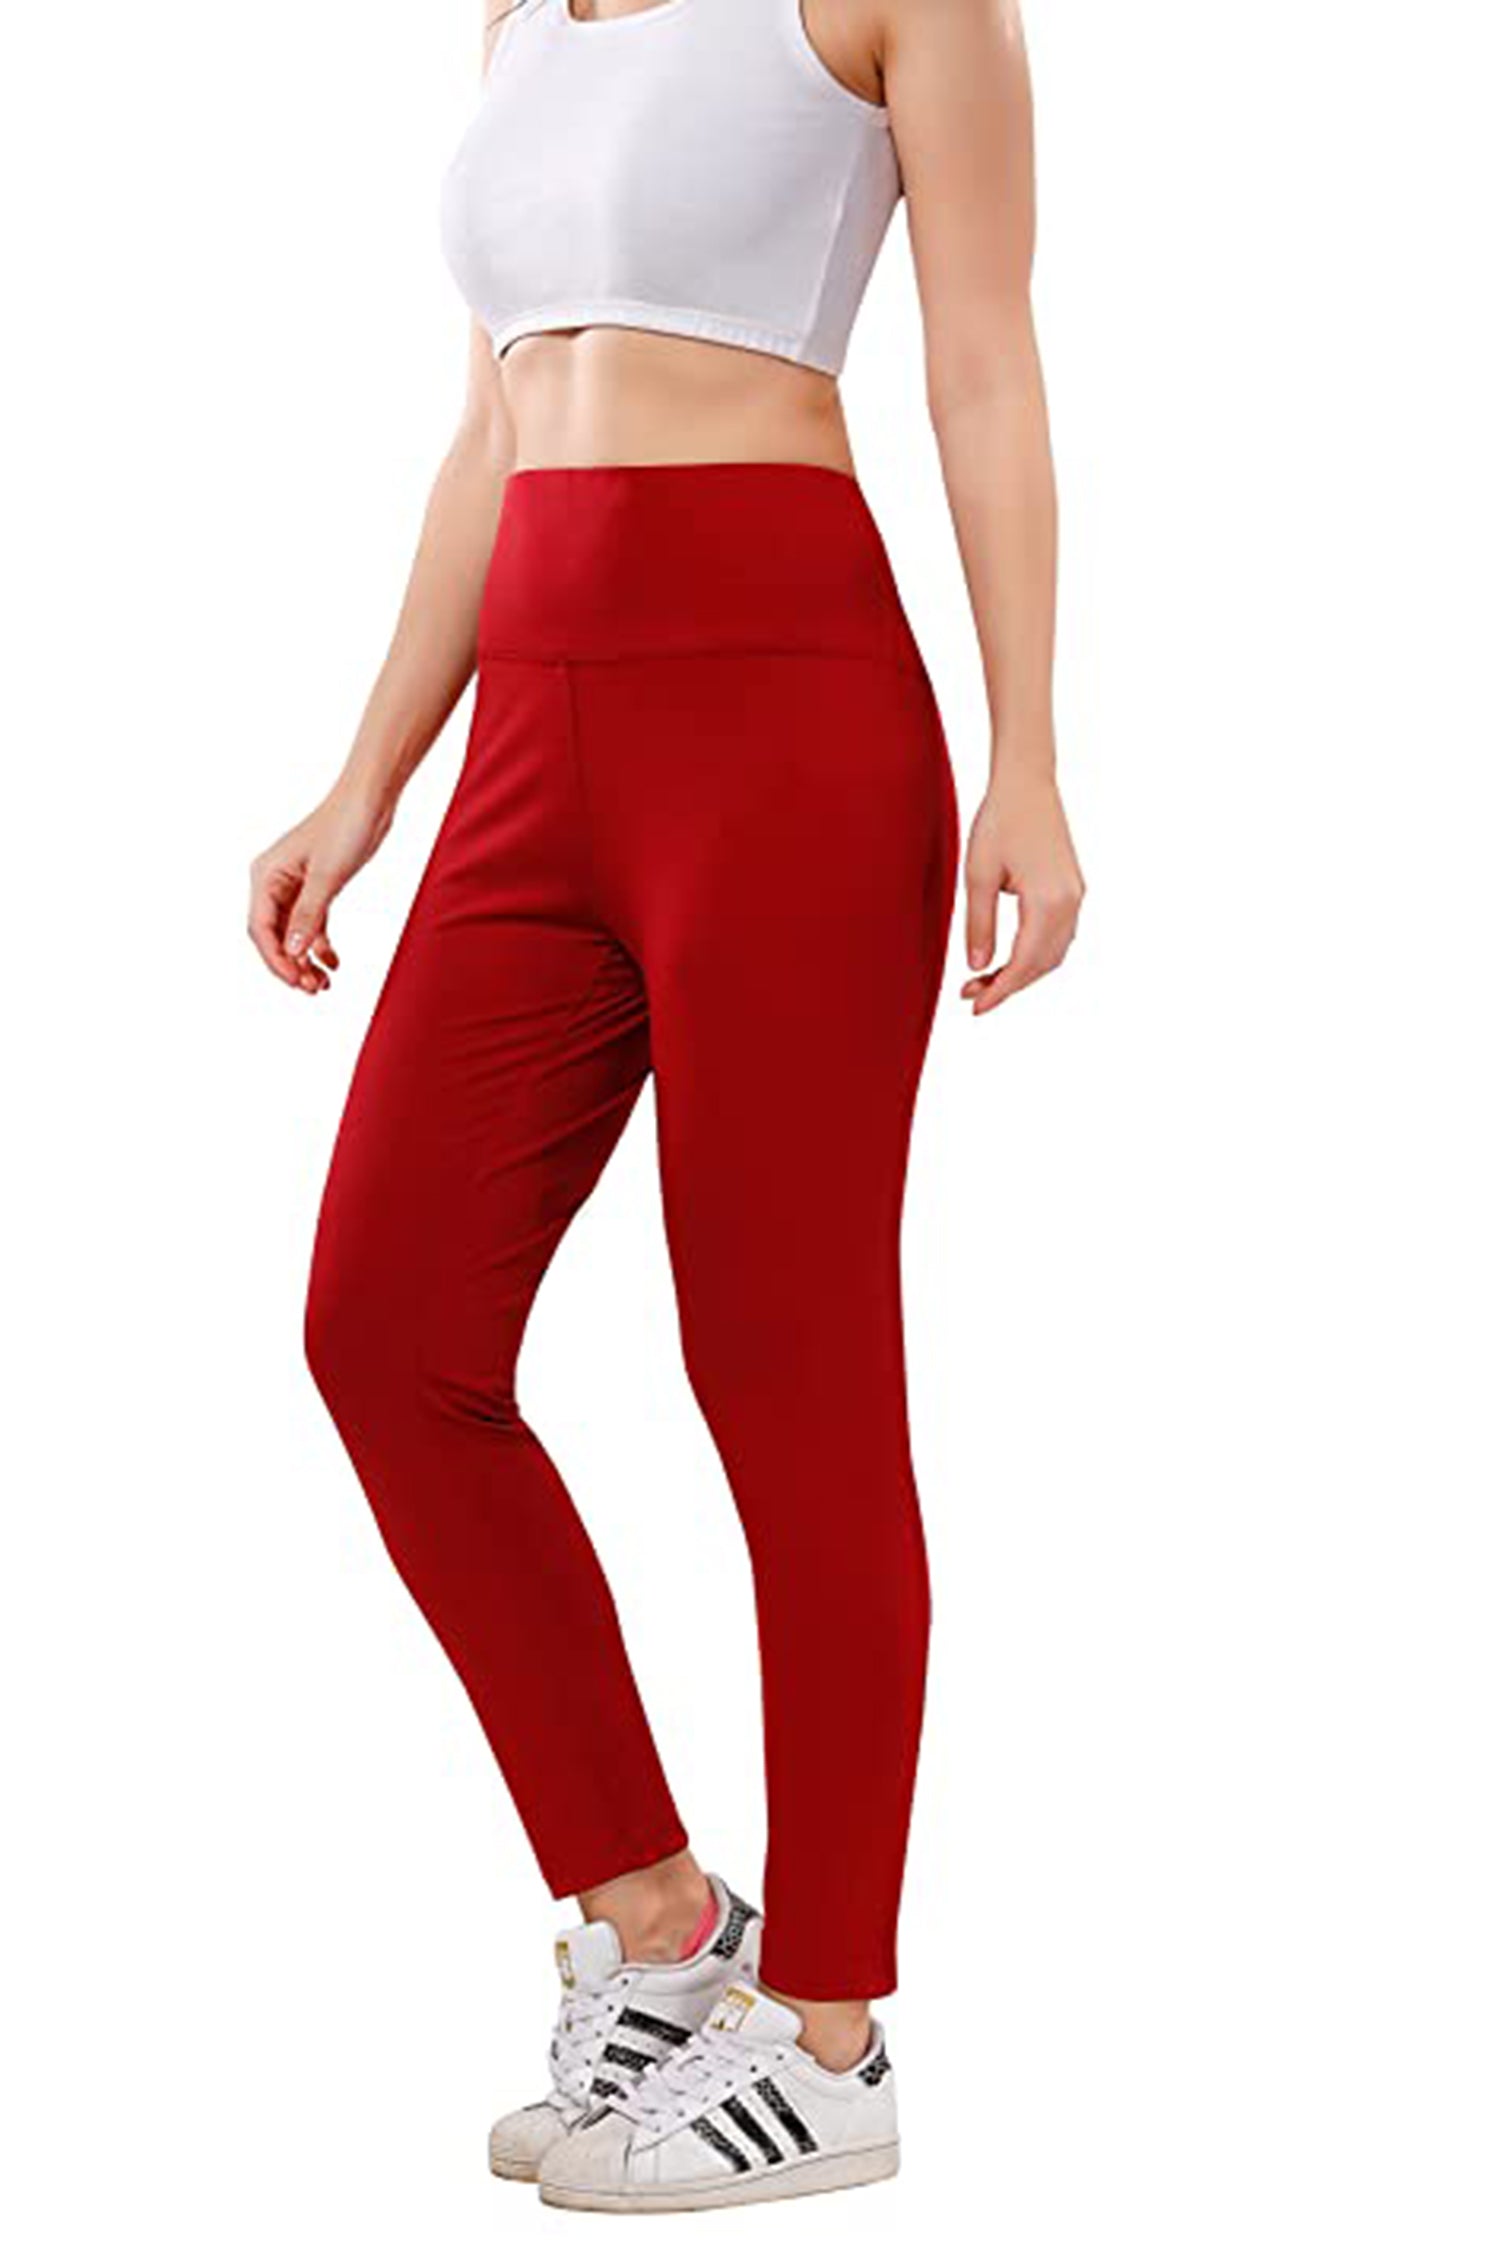 TRASA High Waist Active Yoga Pants for Women's with 2 Pockets